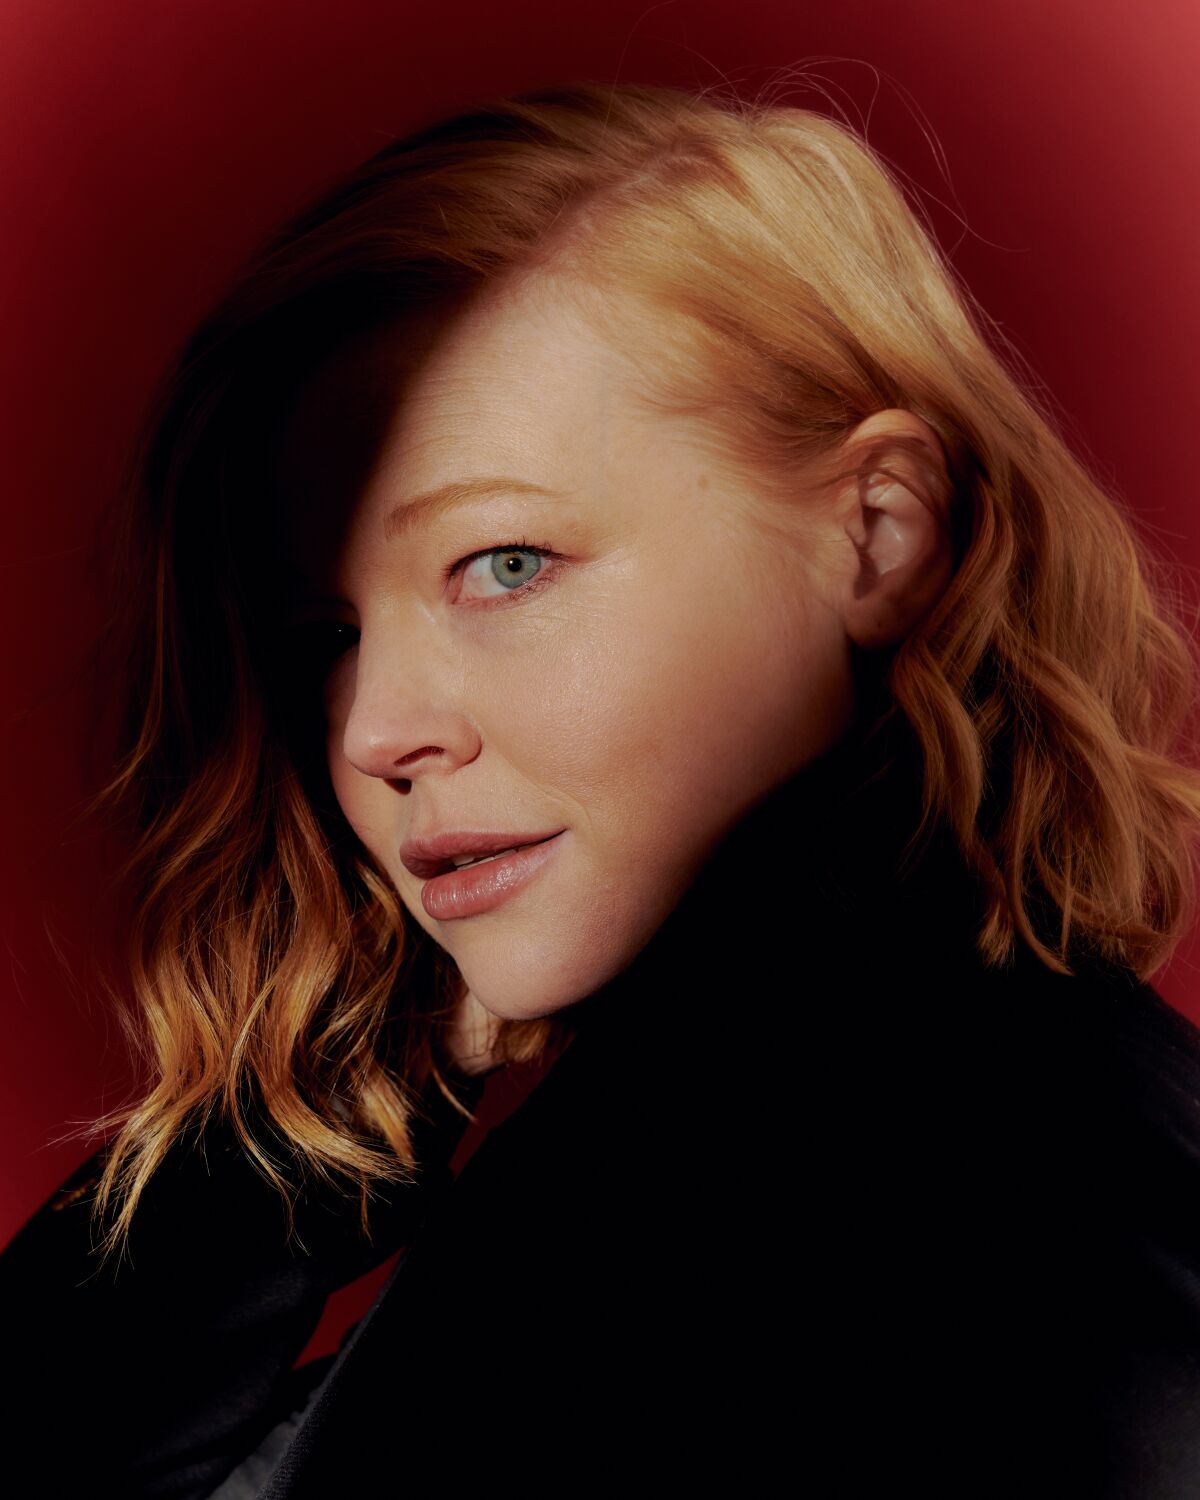 A light shone from the shadows on Sarah Snook's left face.